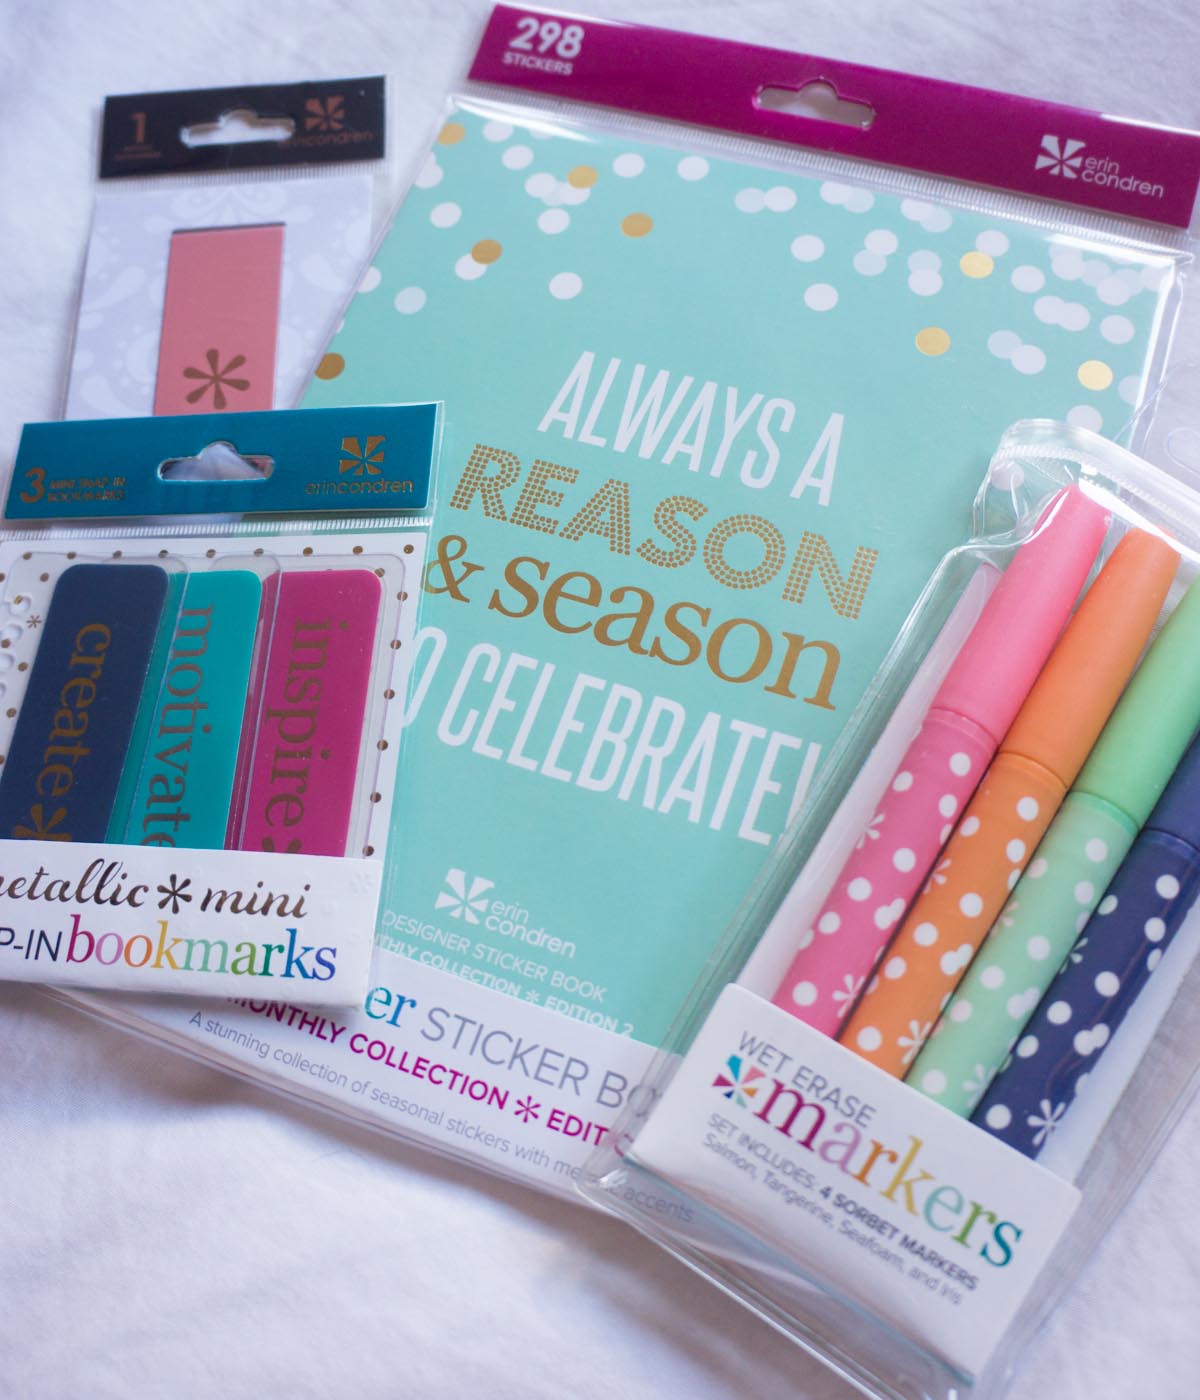 Ultimate Planner Review | Erin Condren | Healthy mind organization stylish, inspirational & customizable life planners & accessories | Carry-all clutch | Stickers